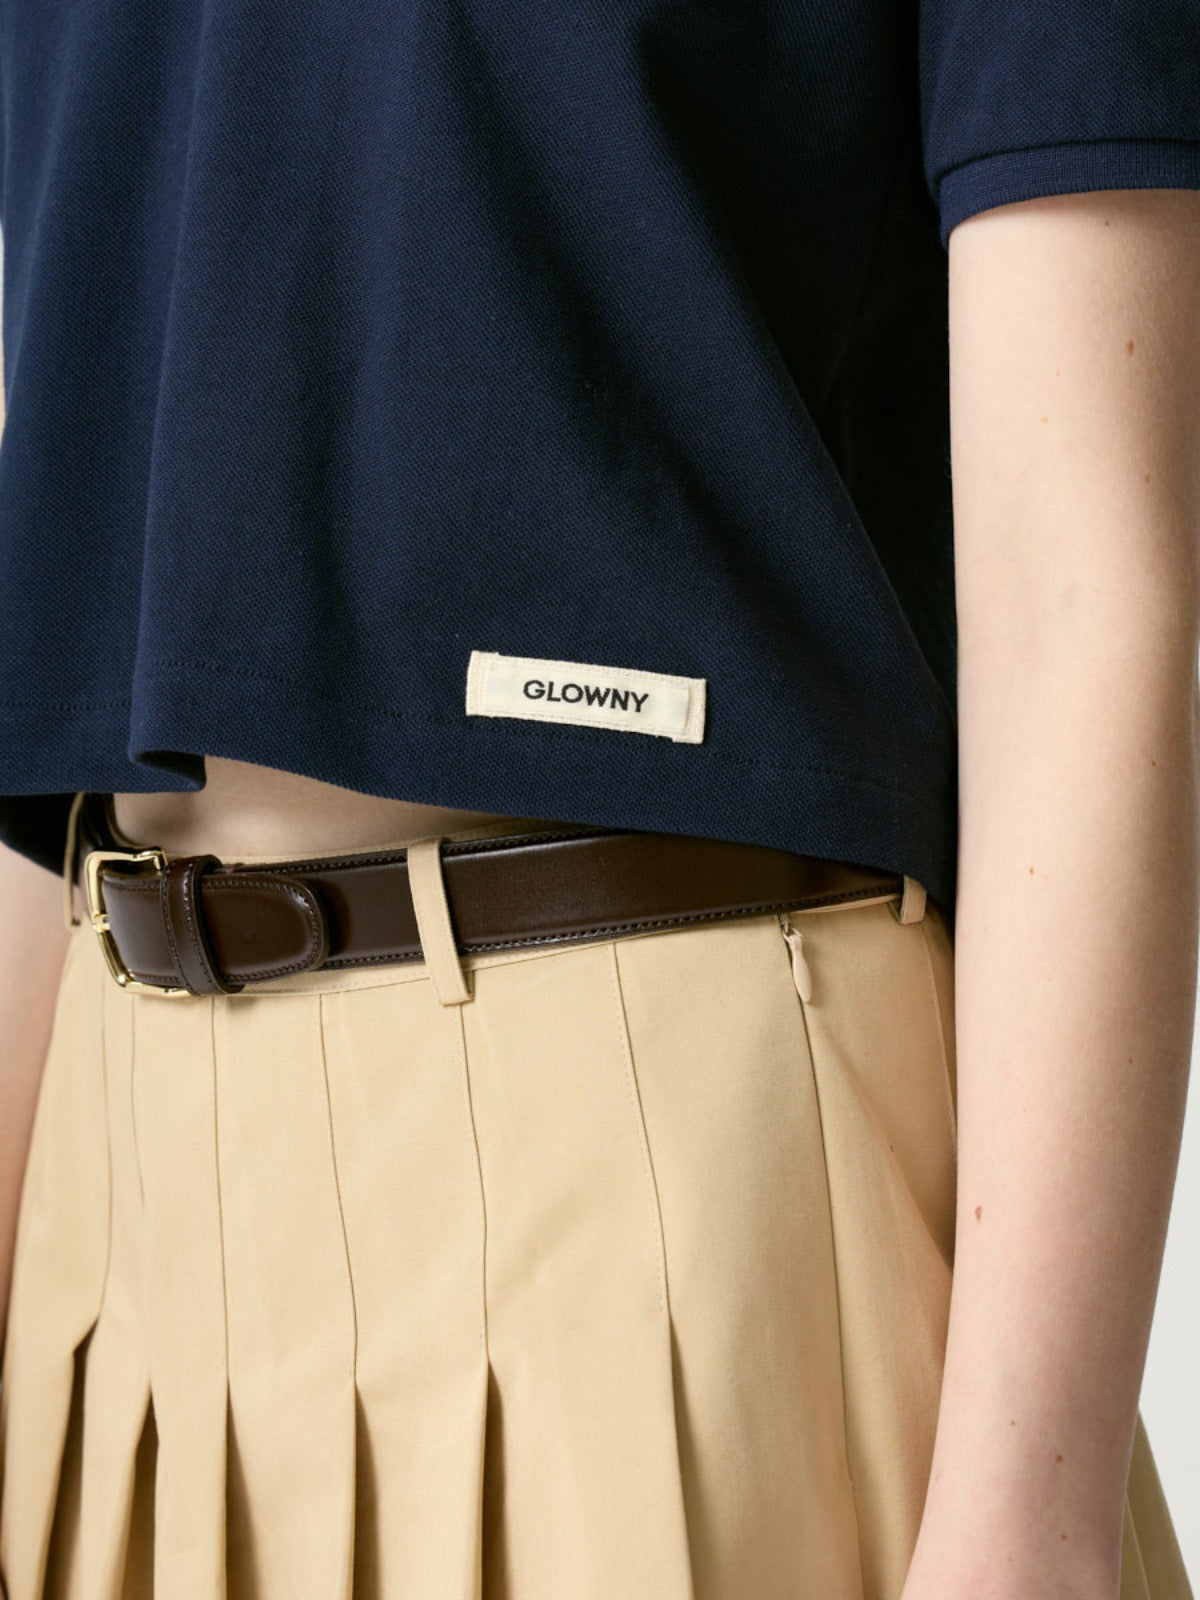 Heritage Polo Shirt In Navy